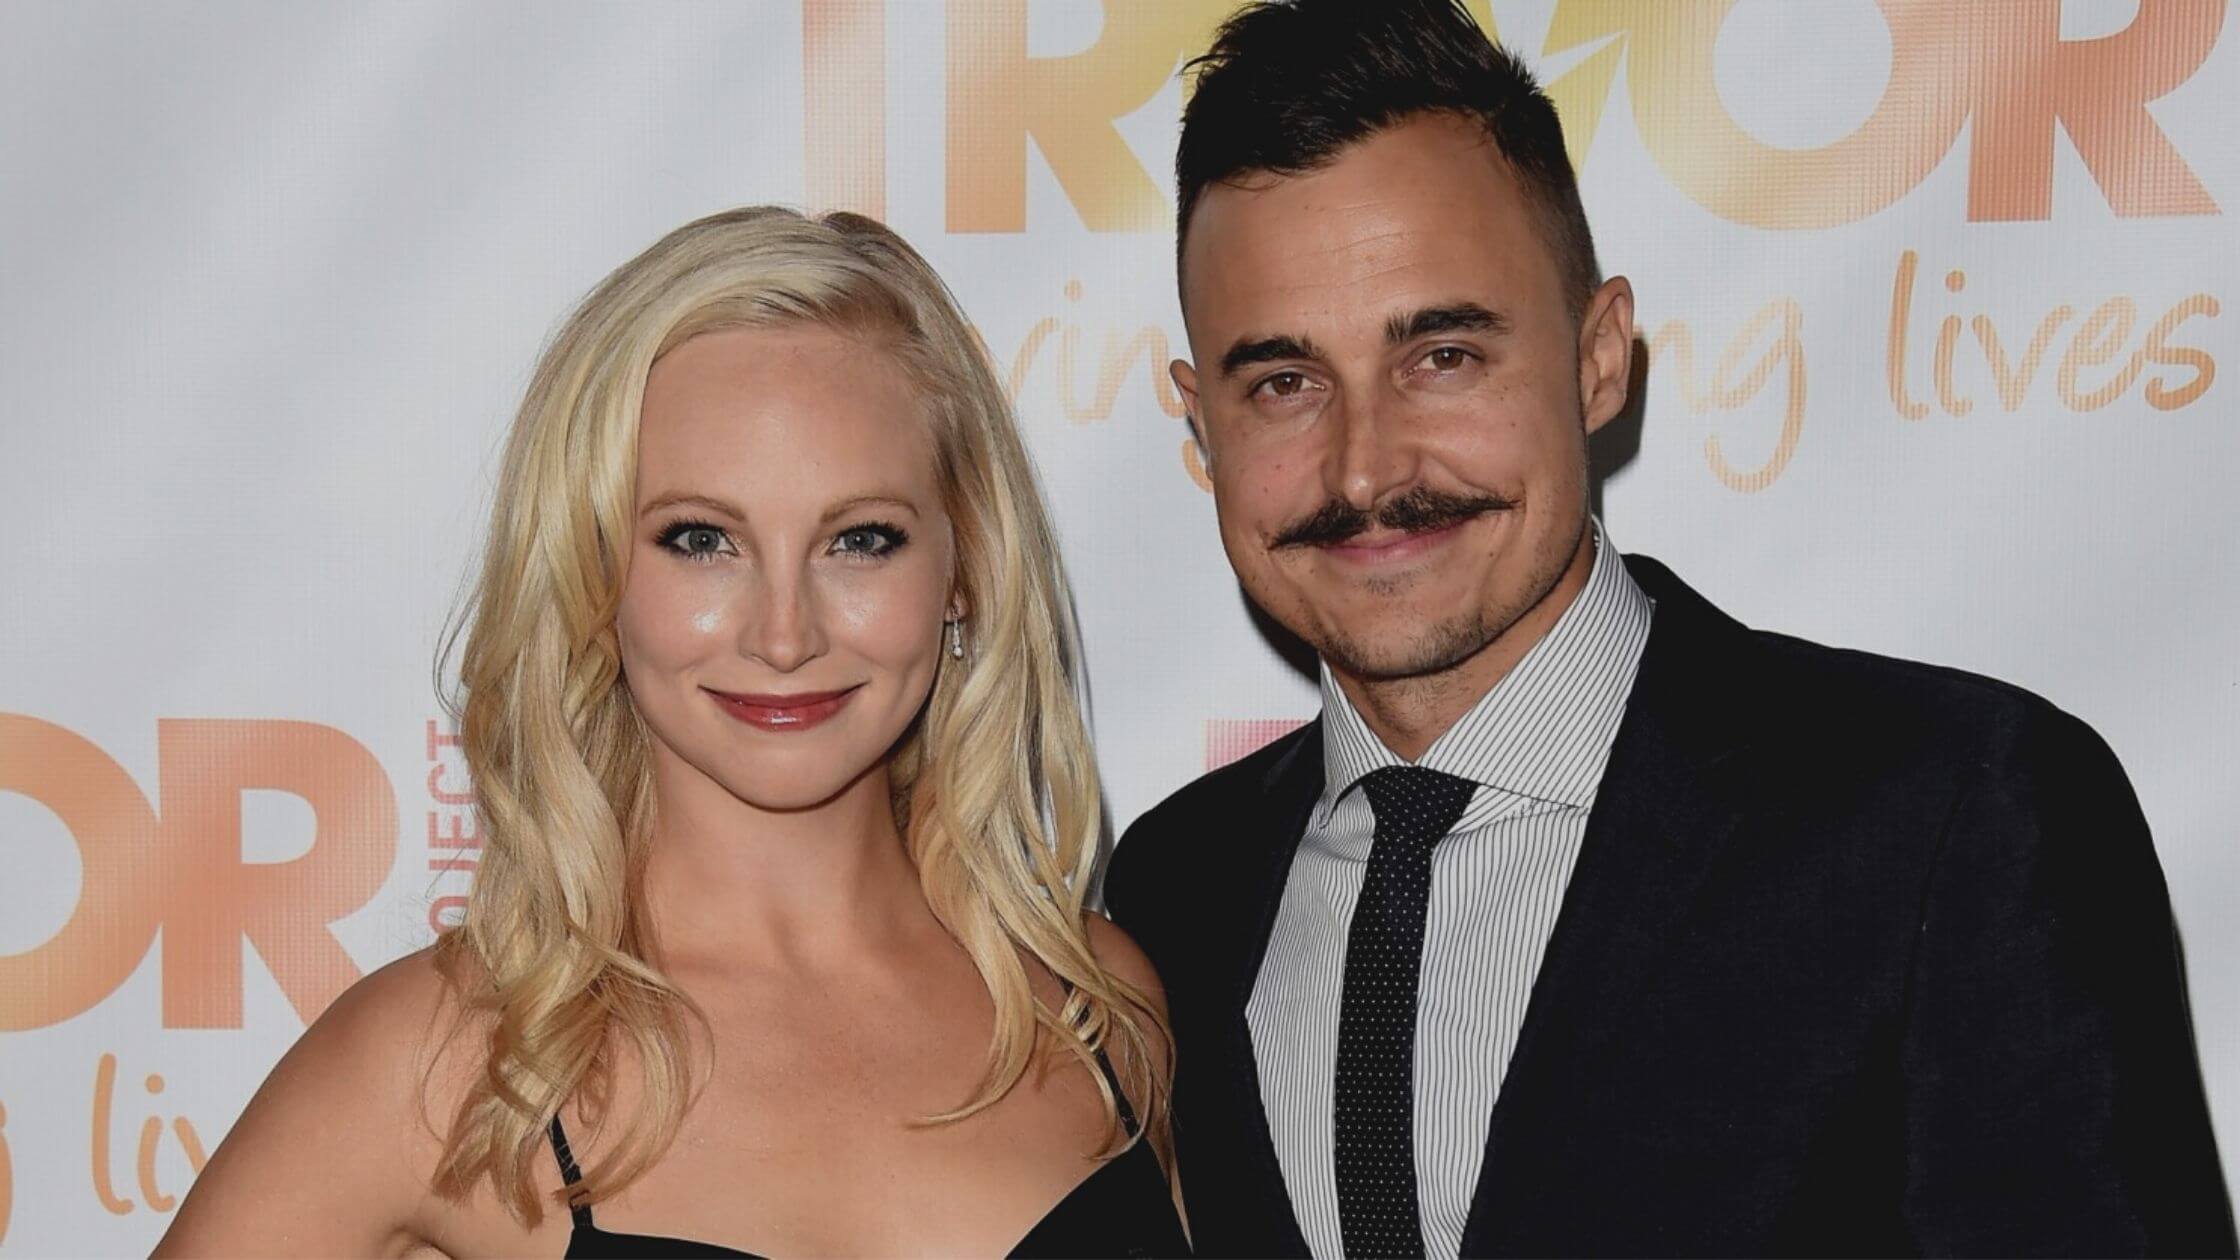 Candice Accola Files For Divorce From Joe King 